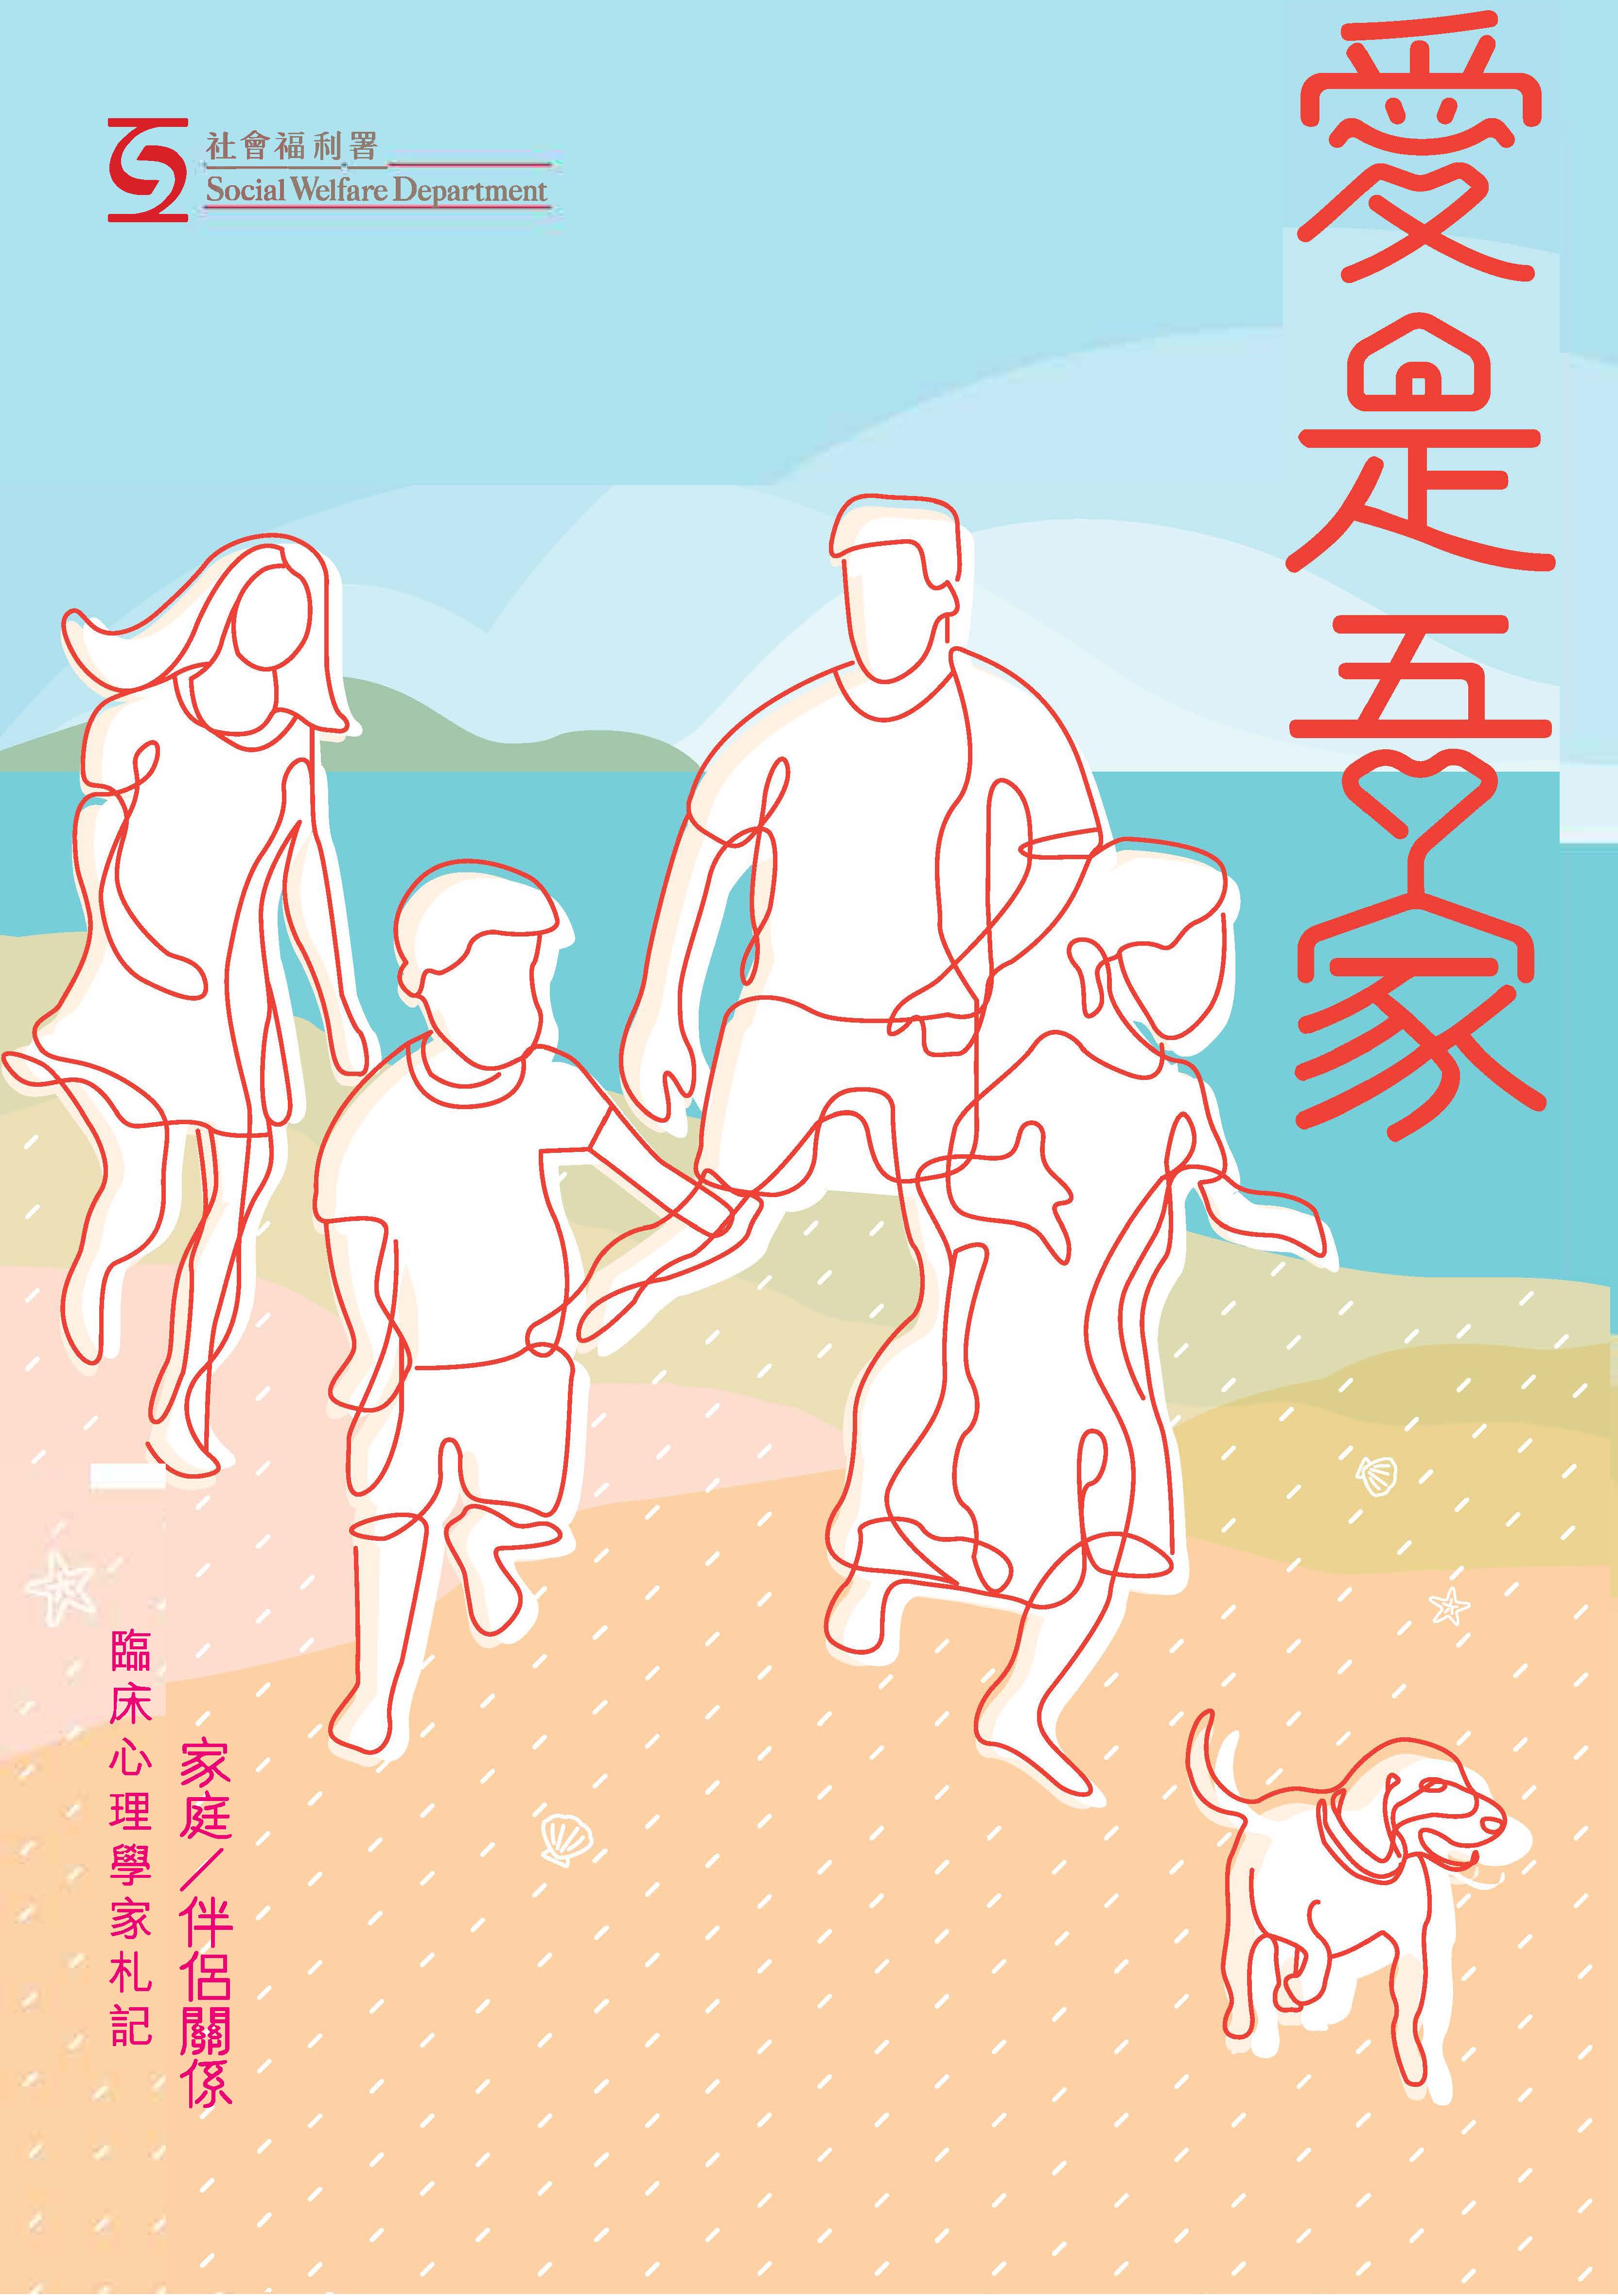 Home is love - Notes of Clinical Psychologists on FamilyCouple         
                                                                       Therapy Work      (Chinese Version Only)